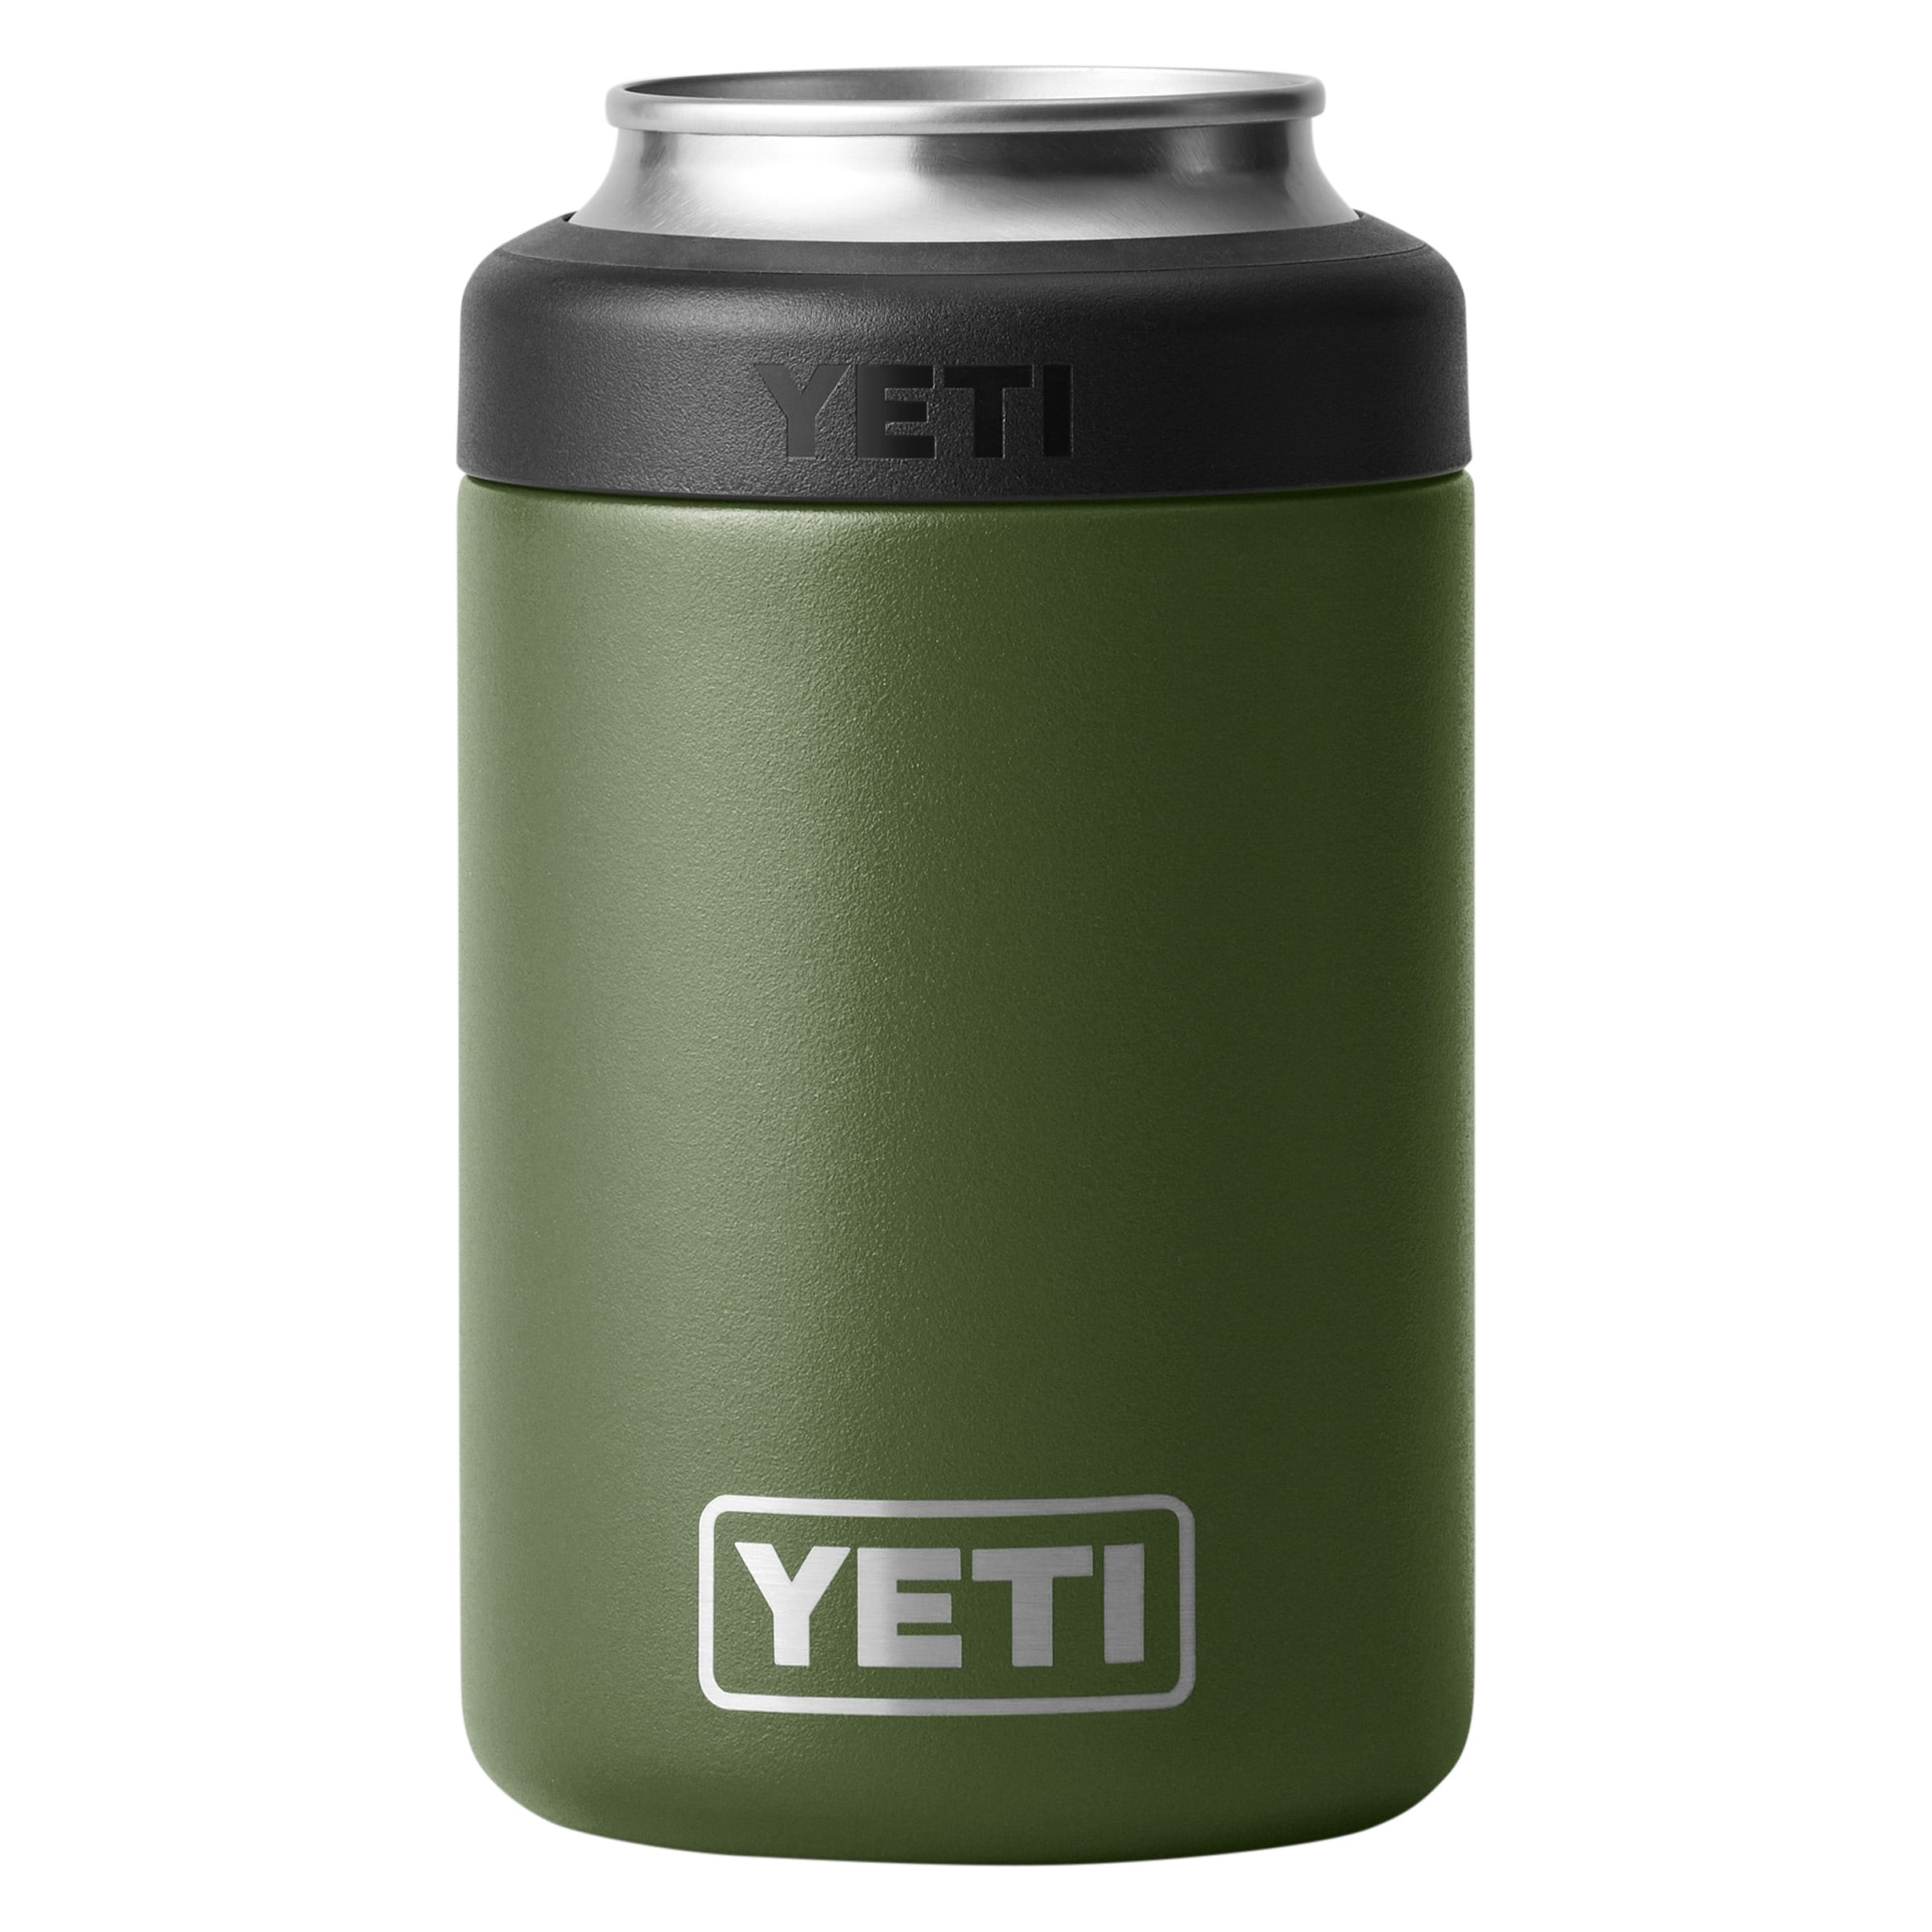 Yeti Rambler Colster 2.0 Cooler Can Extender 473ml / 16oz NOW in 5